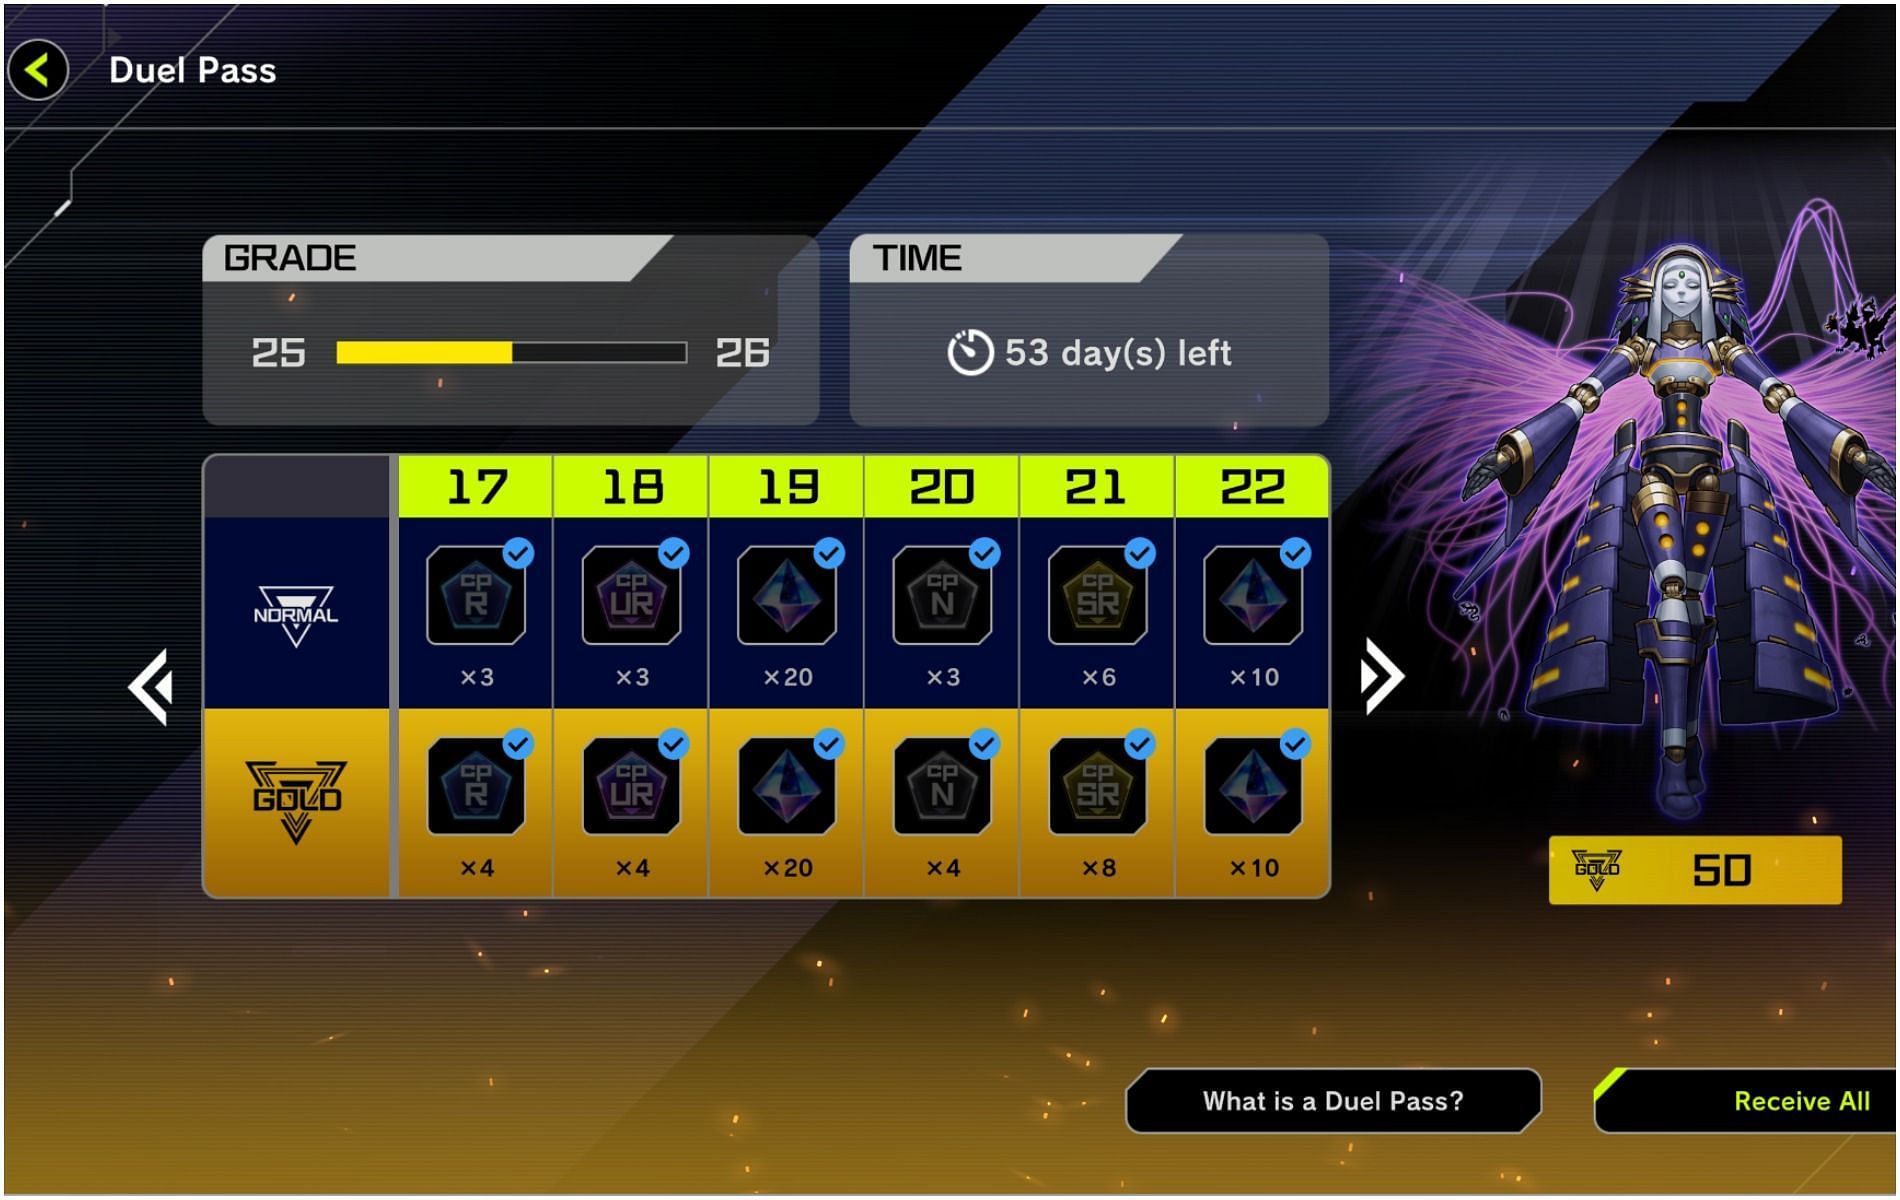 Players do not need to invest money into the duel pass, but the gold track does have more rewards (Image via Konami)